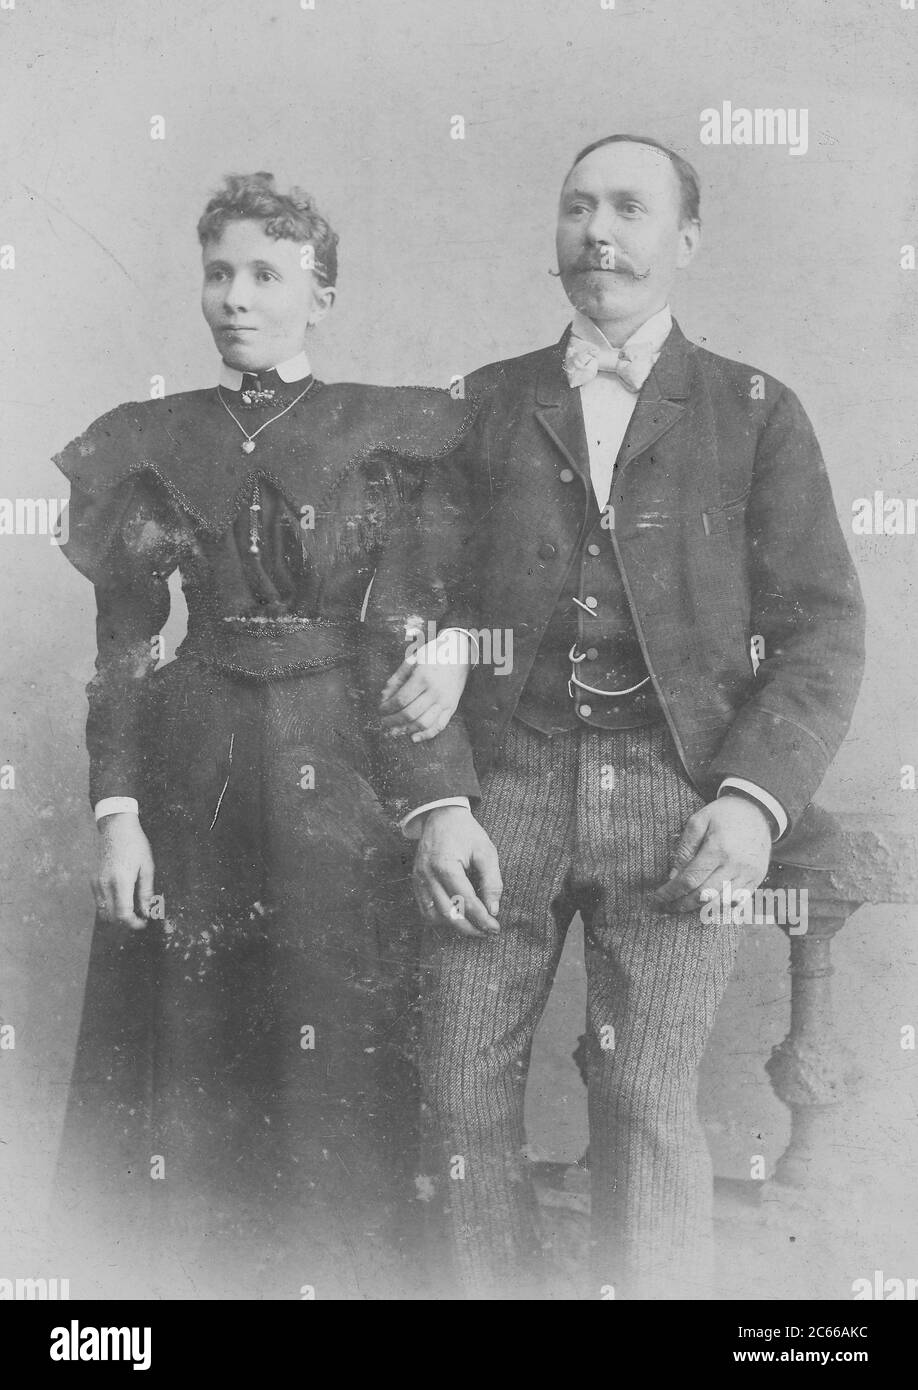 elderly couple in Sunday clothes at the photographer, 1890, Hamburg, Germany  /  älteres Ehepaar im Sonntagsgewand beim Fotografen, 1890, Hamburg, Deutschland, Historisch, historical, digital improved reproduction of an original from the 19th century / digitale Reproduktion einer Originalvorlage aus dem 19. Jahrhundert, Carte de visite, a type of small photograph which was patented in 1854, each photograph was the size of a visiting card, and such photograph cards were commonly traded among friends and visitors in the 1860s  /  Visitformat, Carte de Visite, auf Karton fixierte Fotografie im Fo Stock Photo